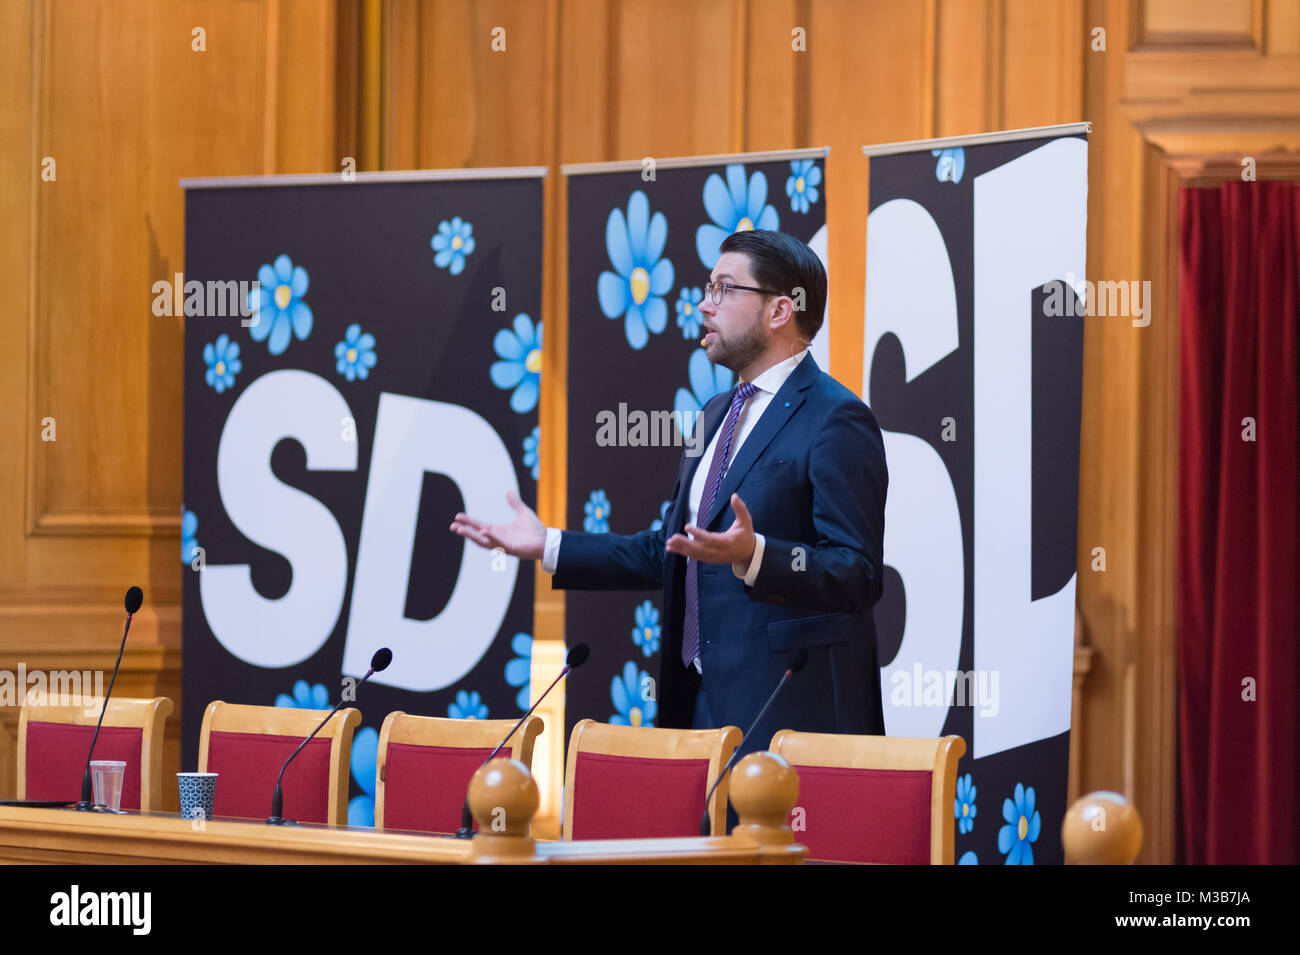 Stockholm, Sweden, 10th February, 2018. 'Future Conference' Sweden Democrats (SD) (Sverigedemokraterna) at the House of Parliament, Stockholm. Party leader Jimmie Åkesson (SD) speech on politics 2018 - 2022 and about his visions for the party's future development. Stock Photo